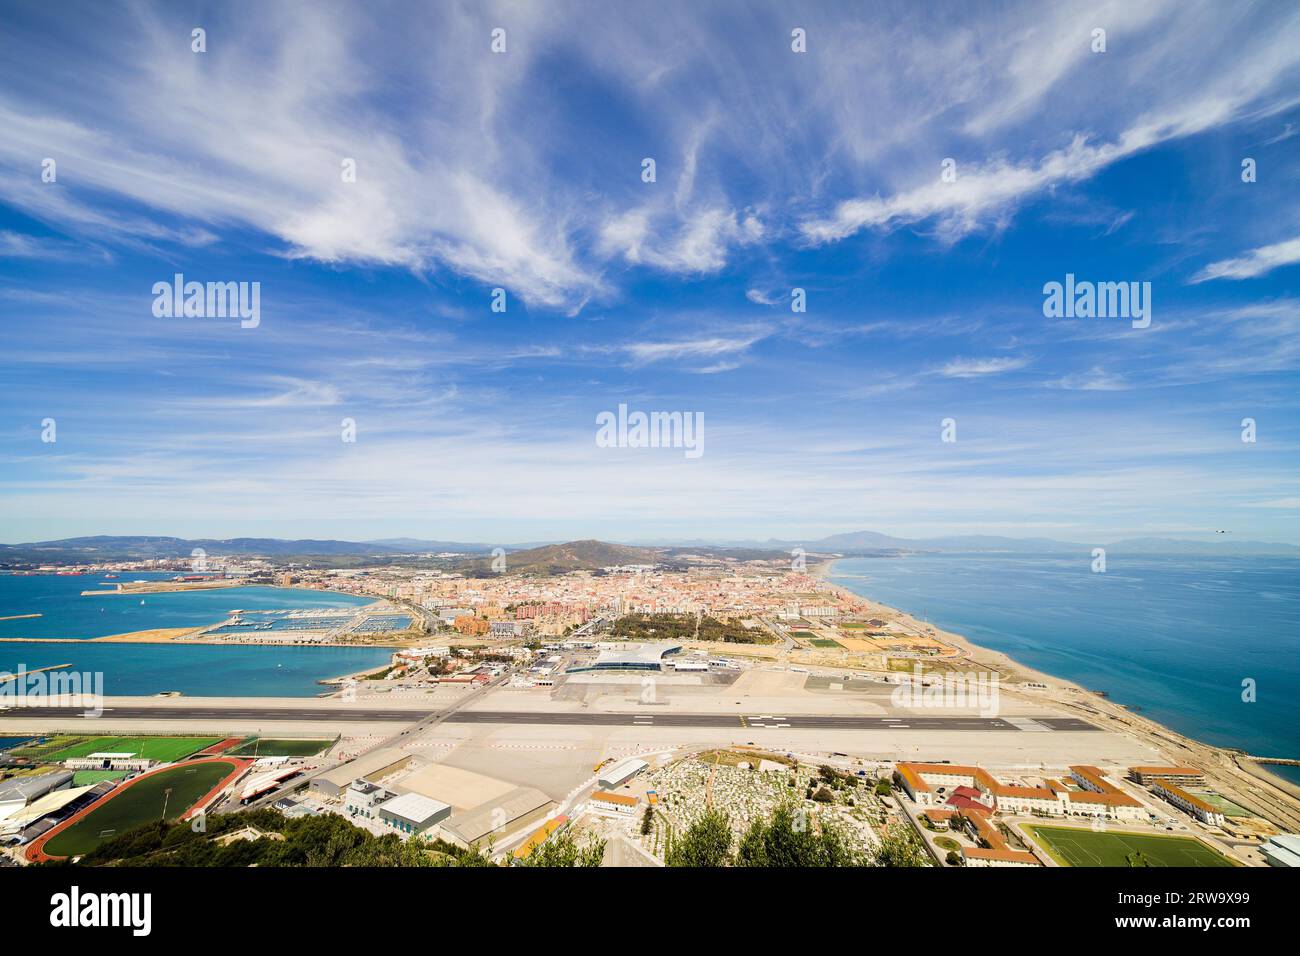 Gibraltar airport runway, La Linea de la Concepcion town in Spain at the far end, Mediterranean Sea on the right, Gibraltar Bay on the left and sky Stock Photo